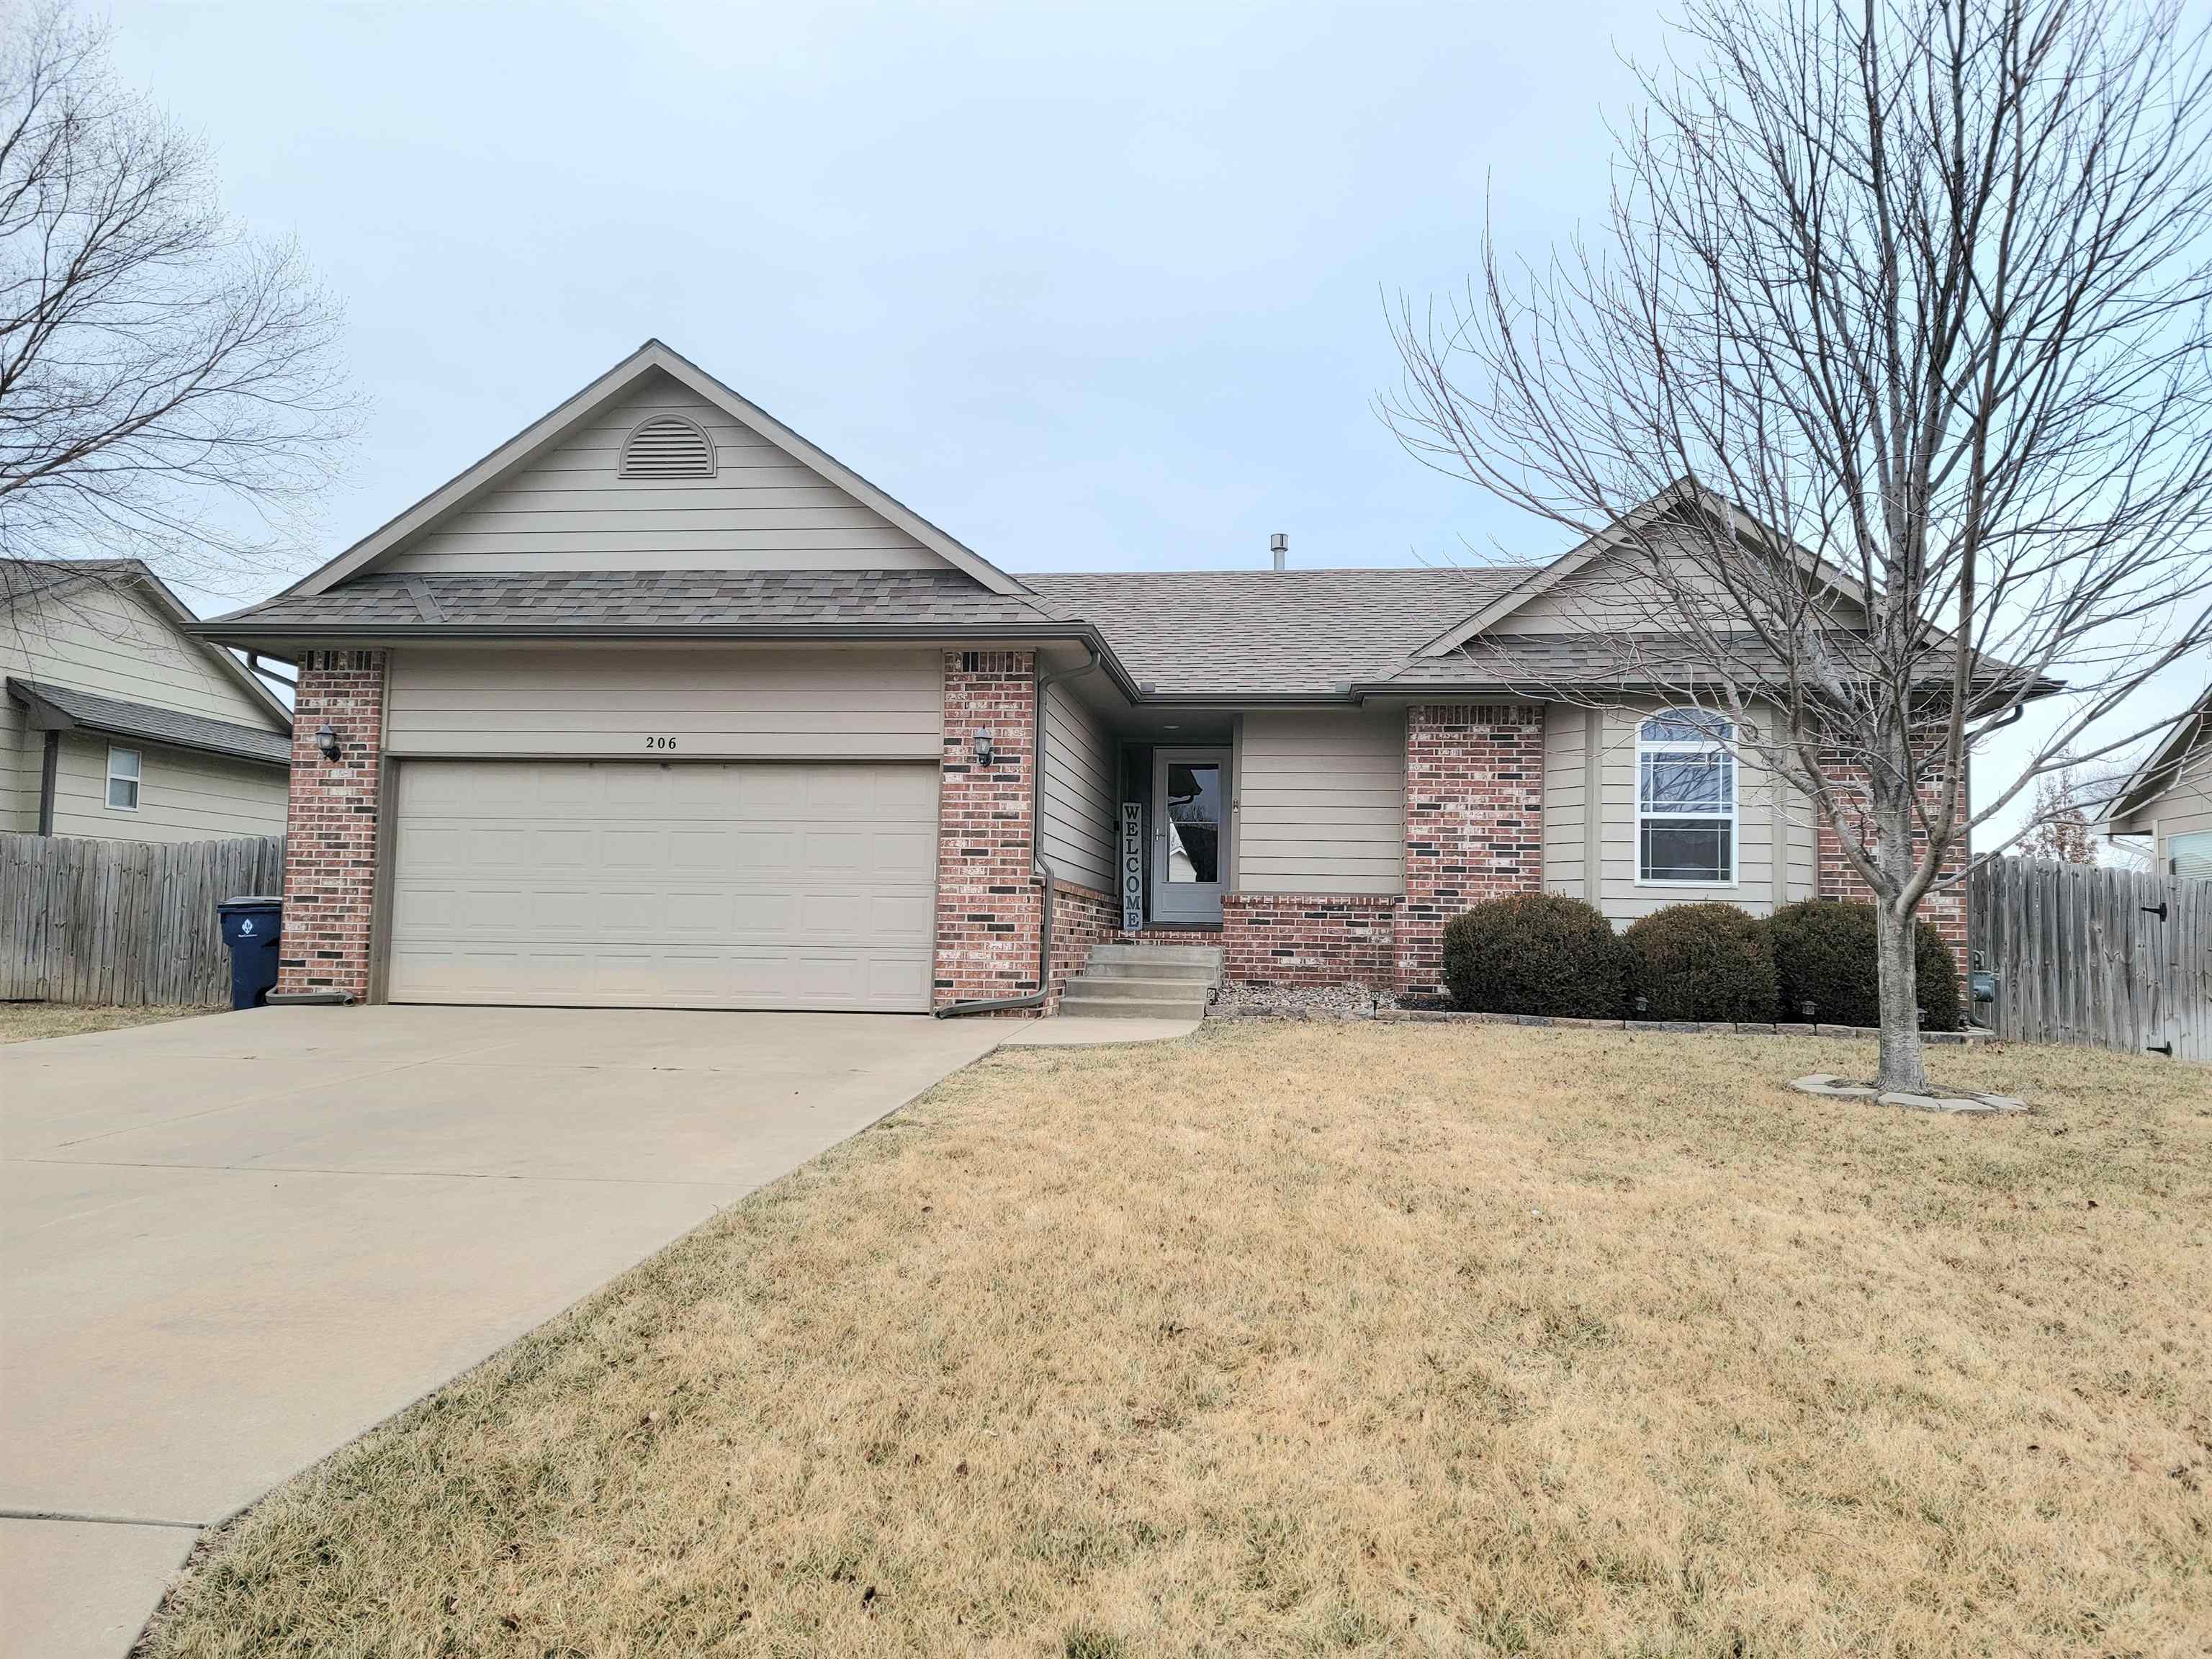 Beautiful family home located within Stone Creek Subdivision in Derby. This home features 4 bedrooms